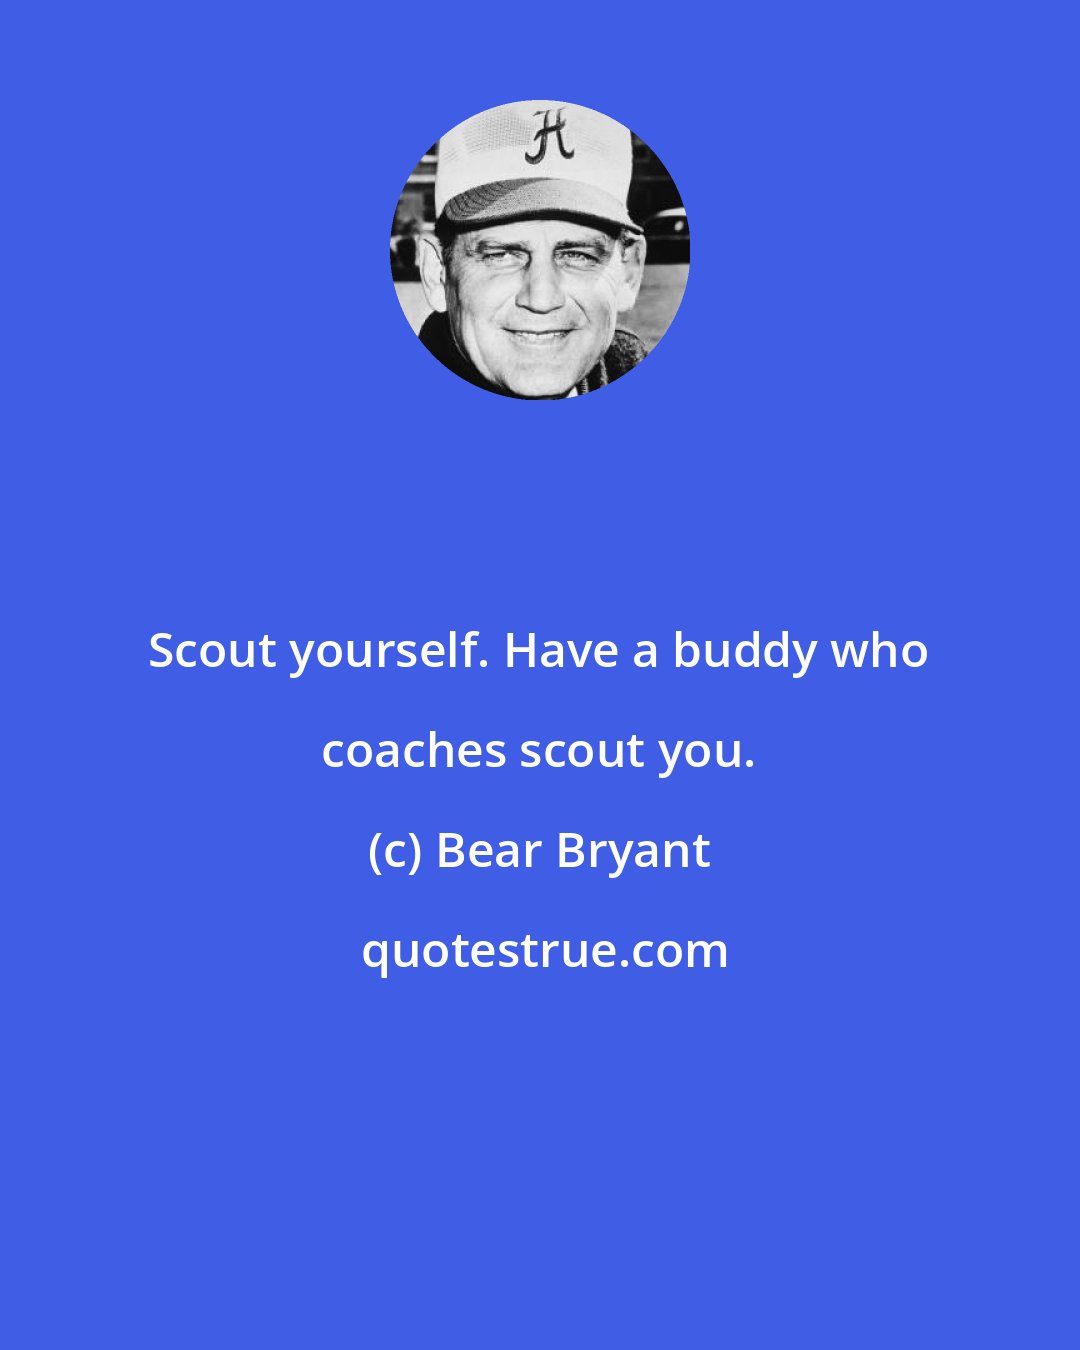 Bear Bryant: Scout yourself. Have a buddy who coaches scout you.